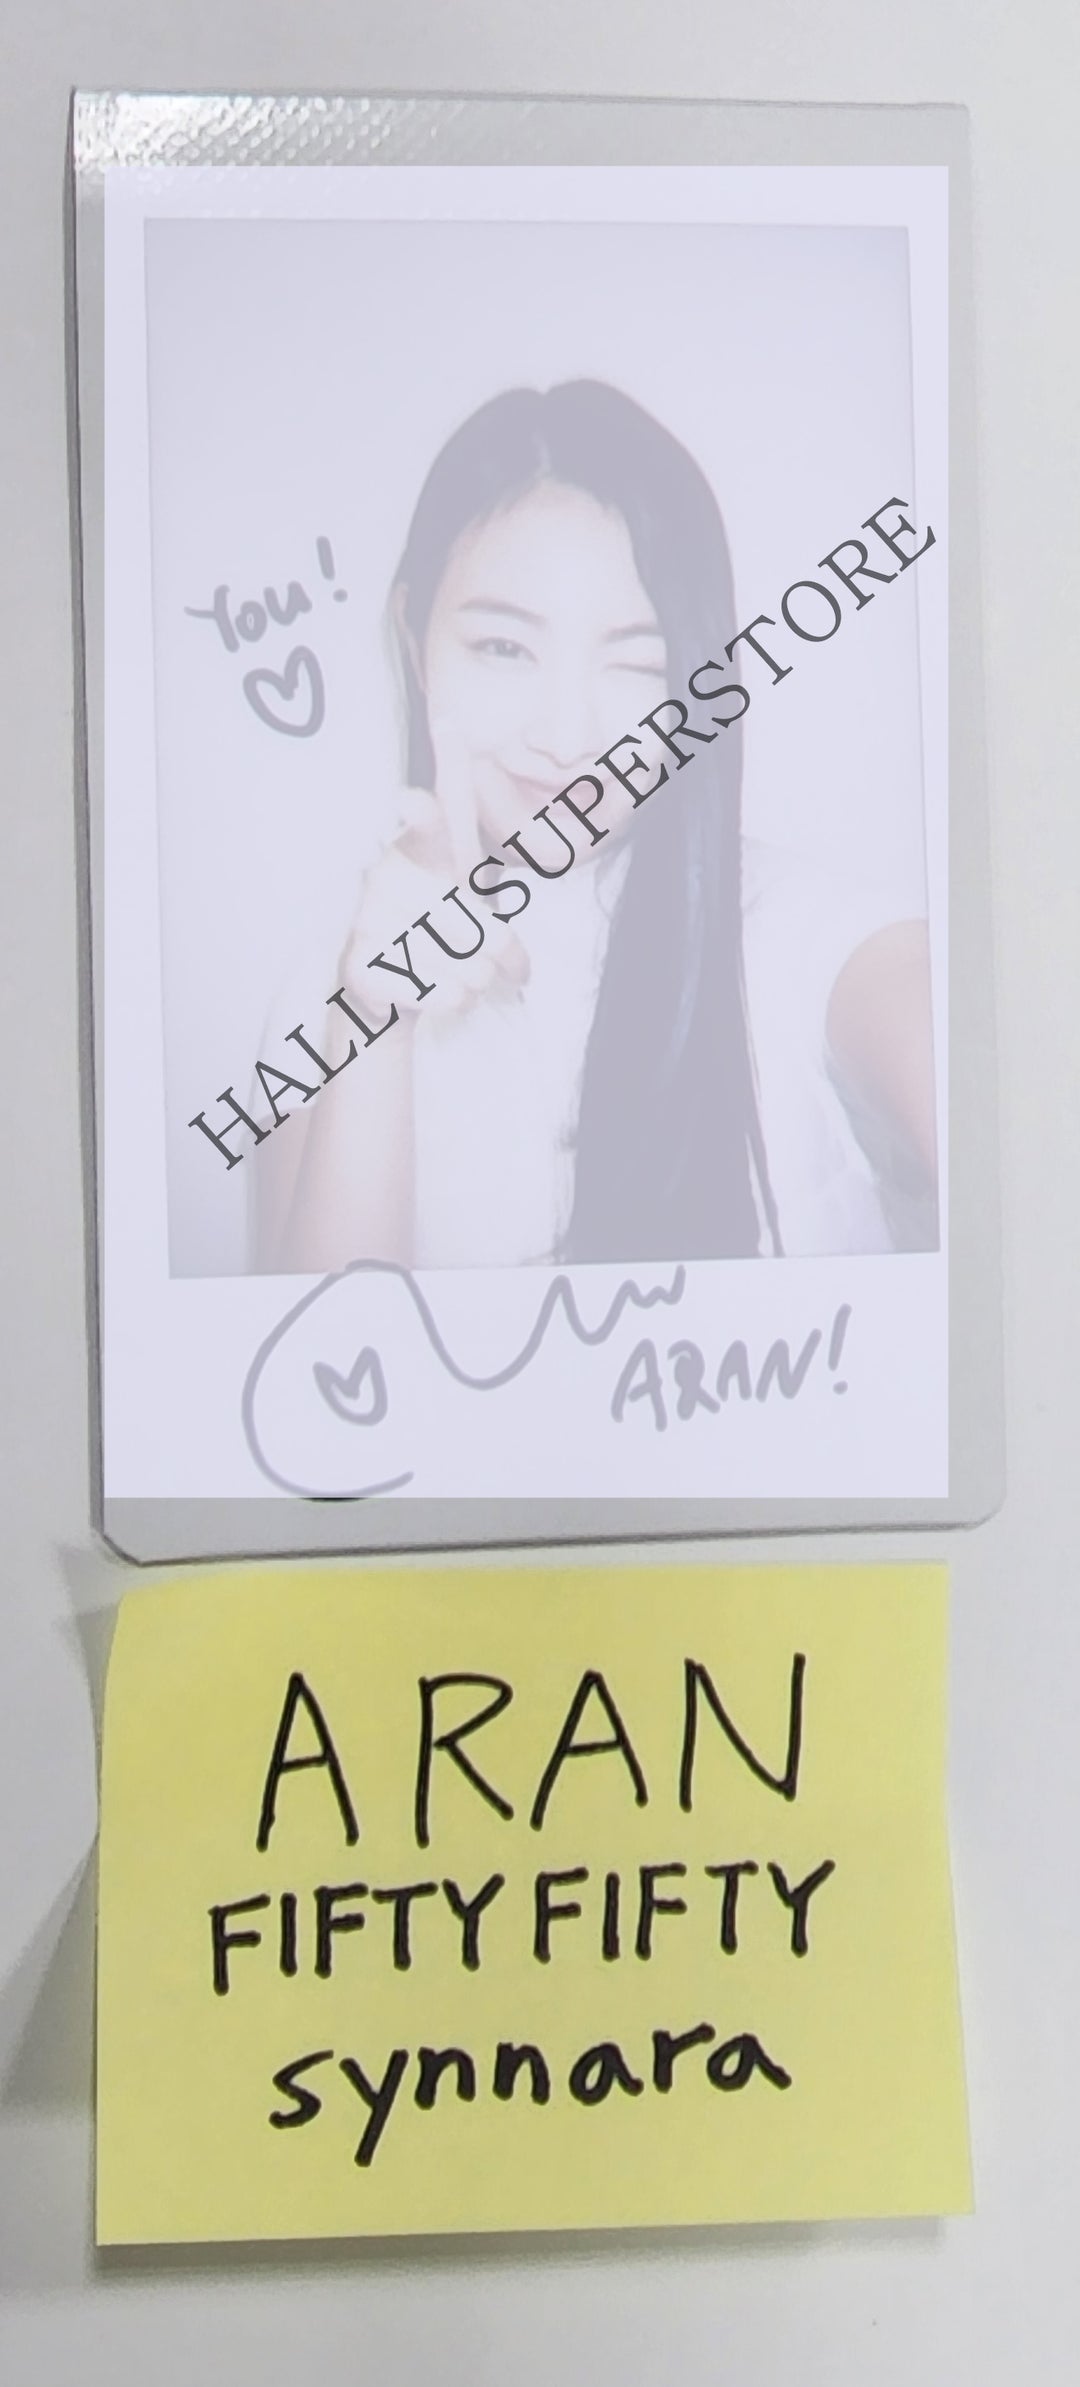 Aran (Of FIFTY FIFTY) "THE FIFTY" 1st EP - Hand Autographed(Signed) Photocard